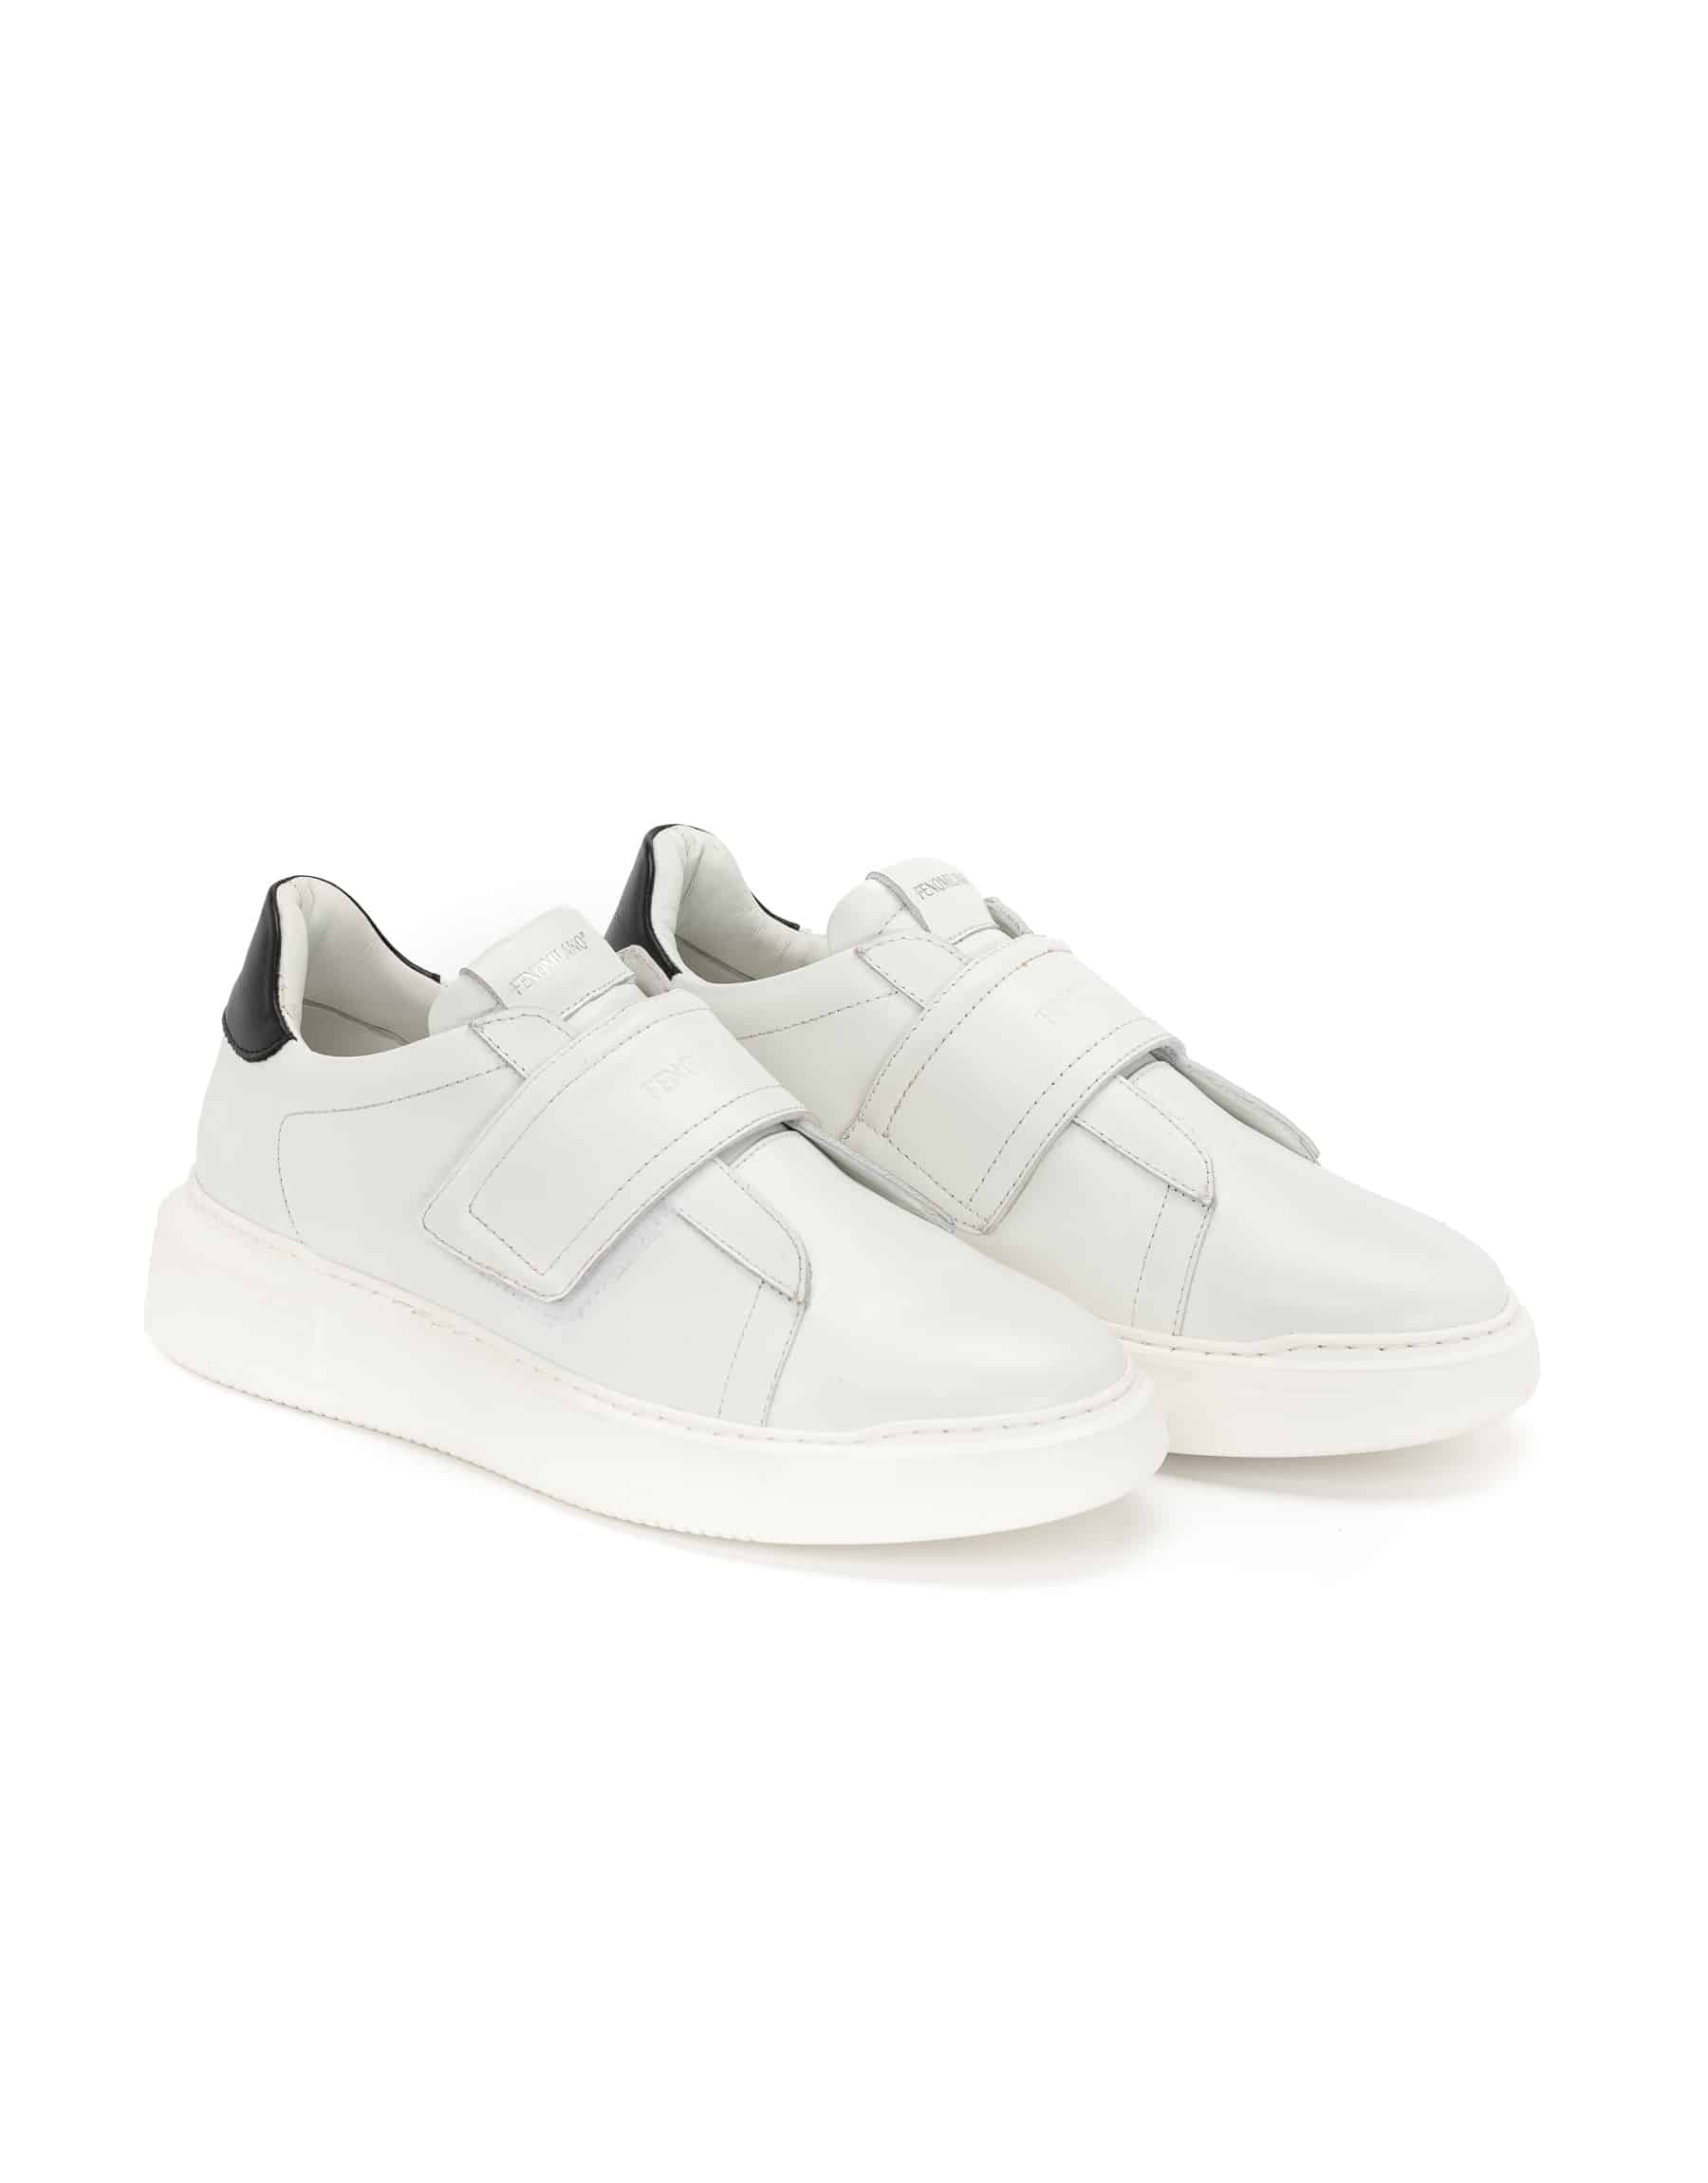 Axel Arigato Area Haze sneakers for Men - White in UAE | Level Shoes